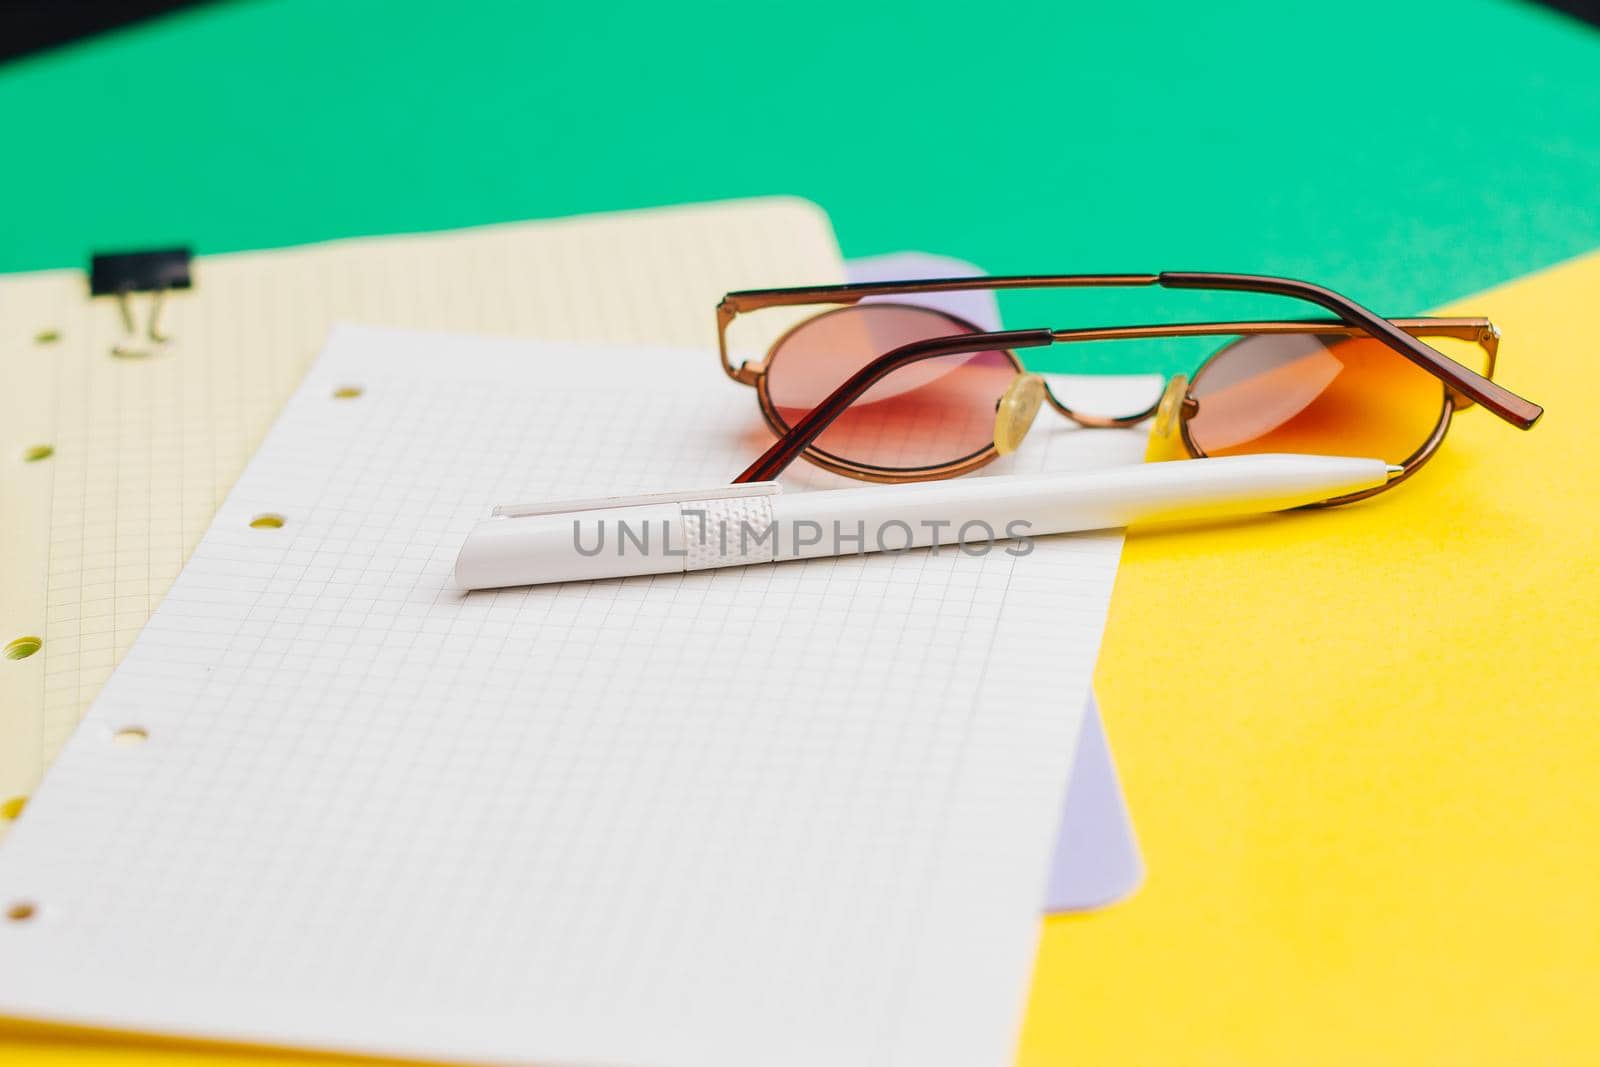 office glasses notepad paper pen the office work. High quality photo